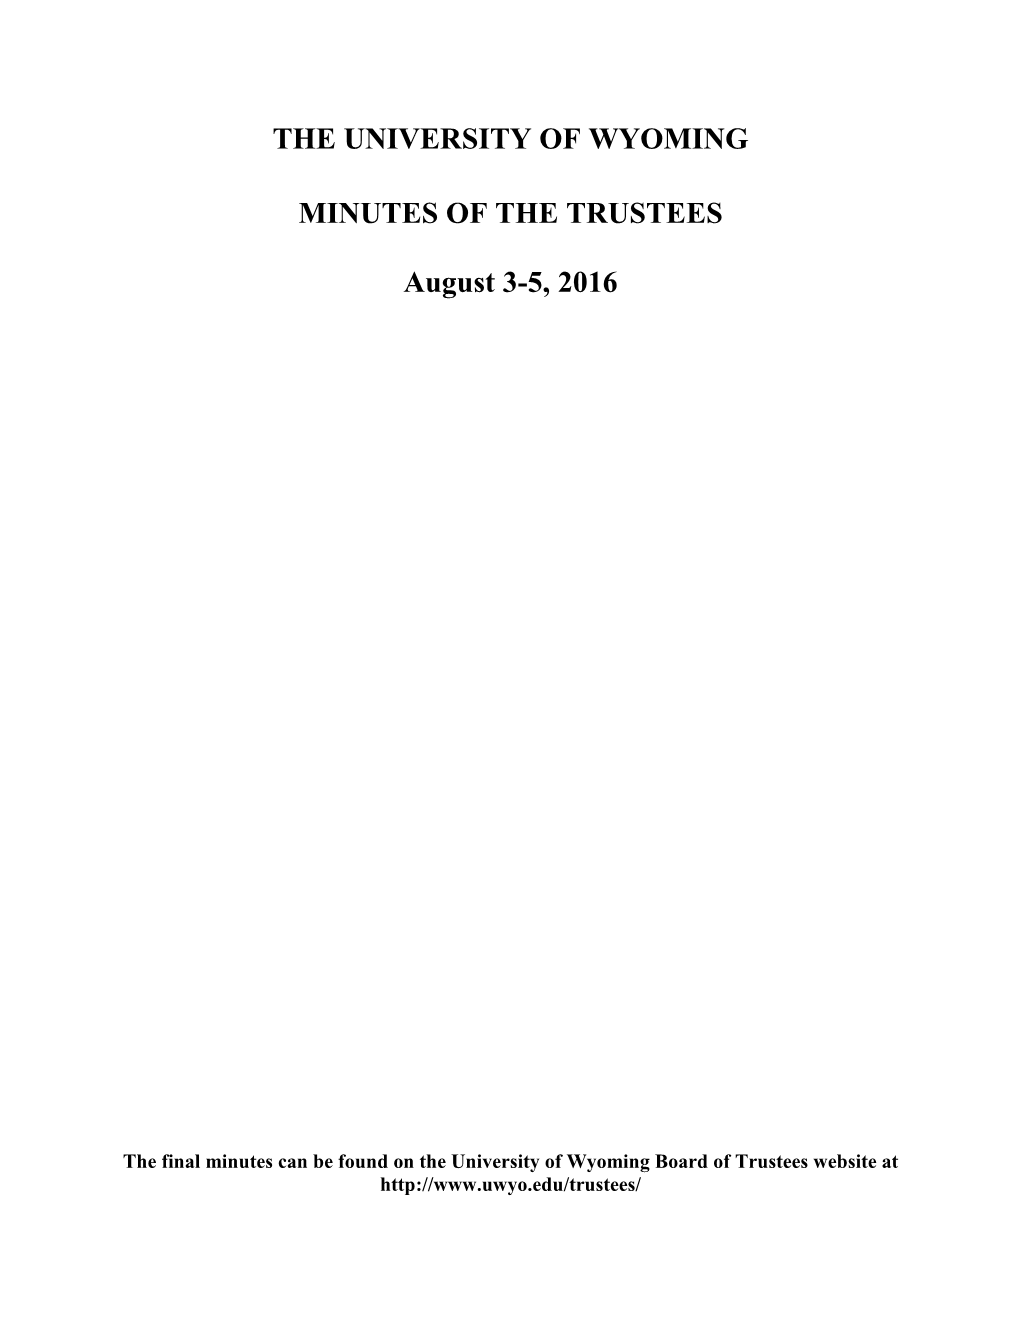 The University of Wyoming Minutes of the Trustees